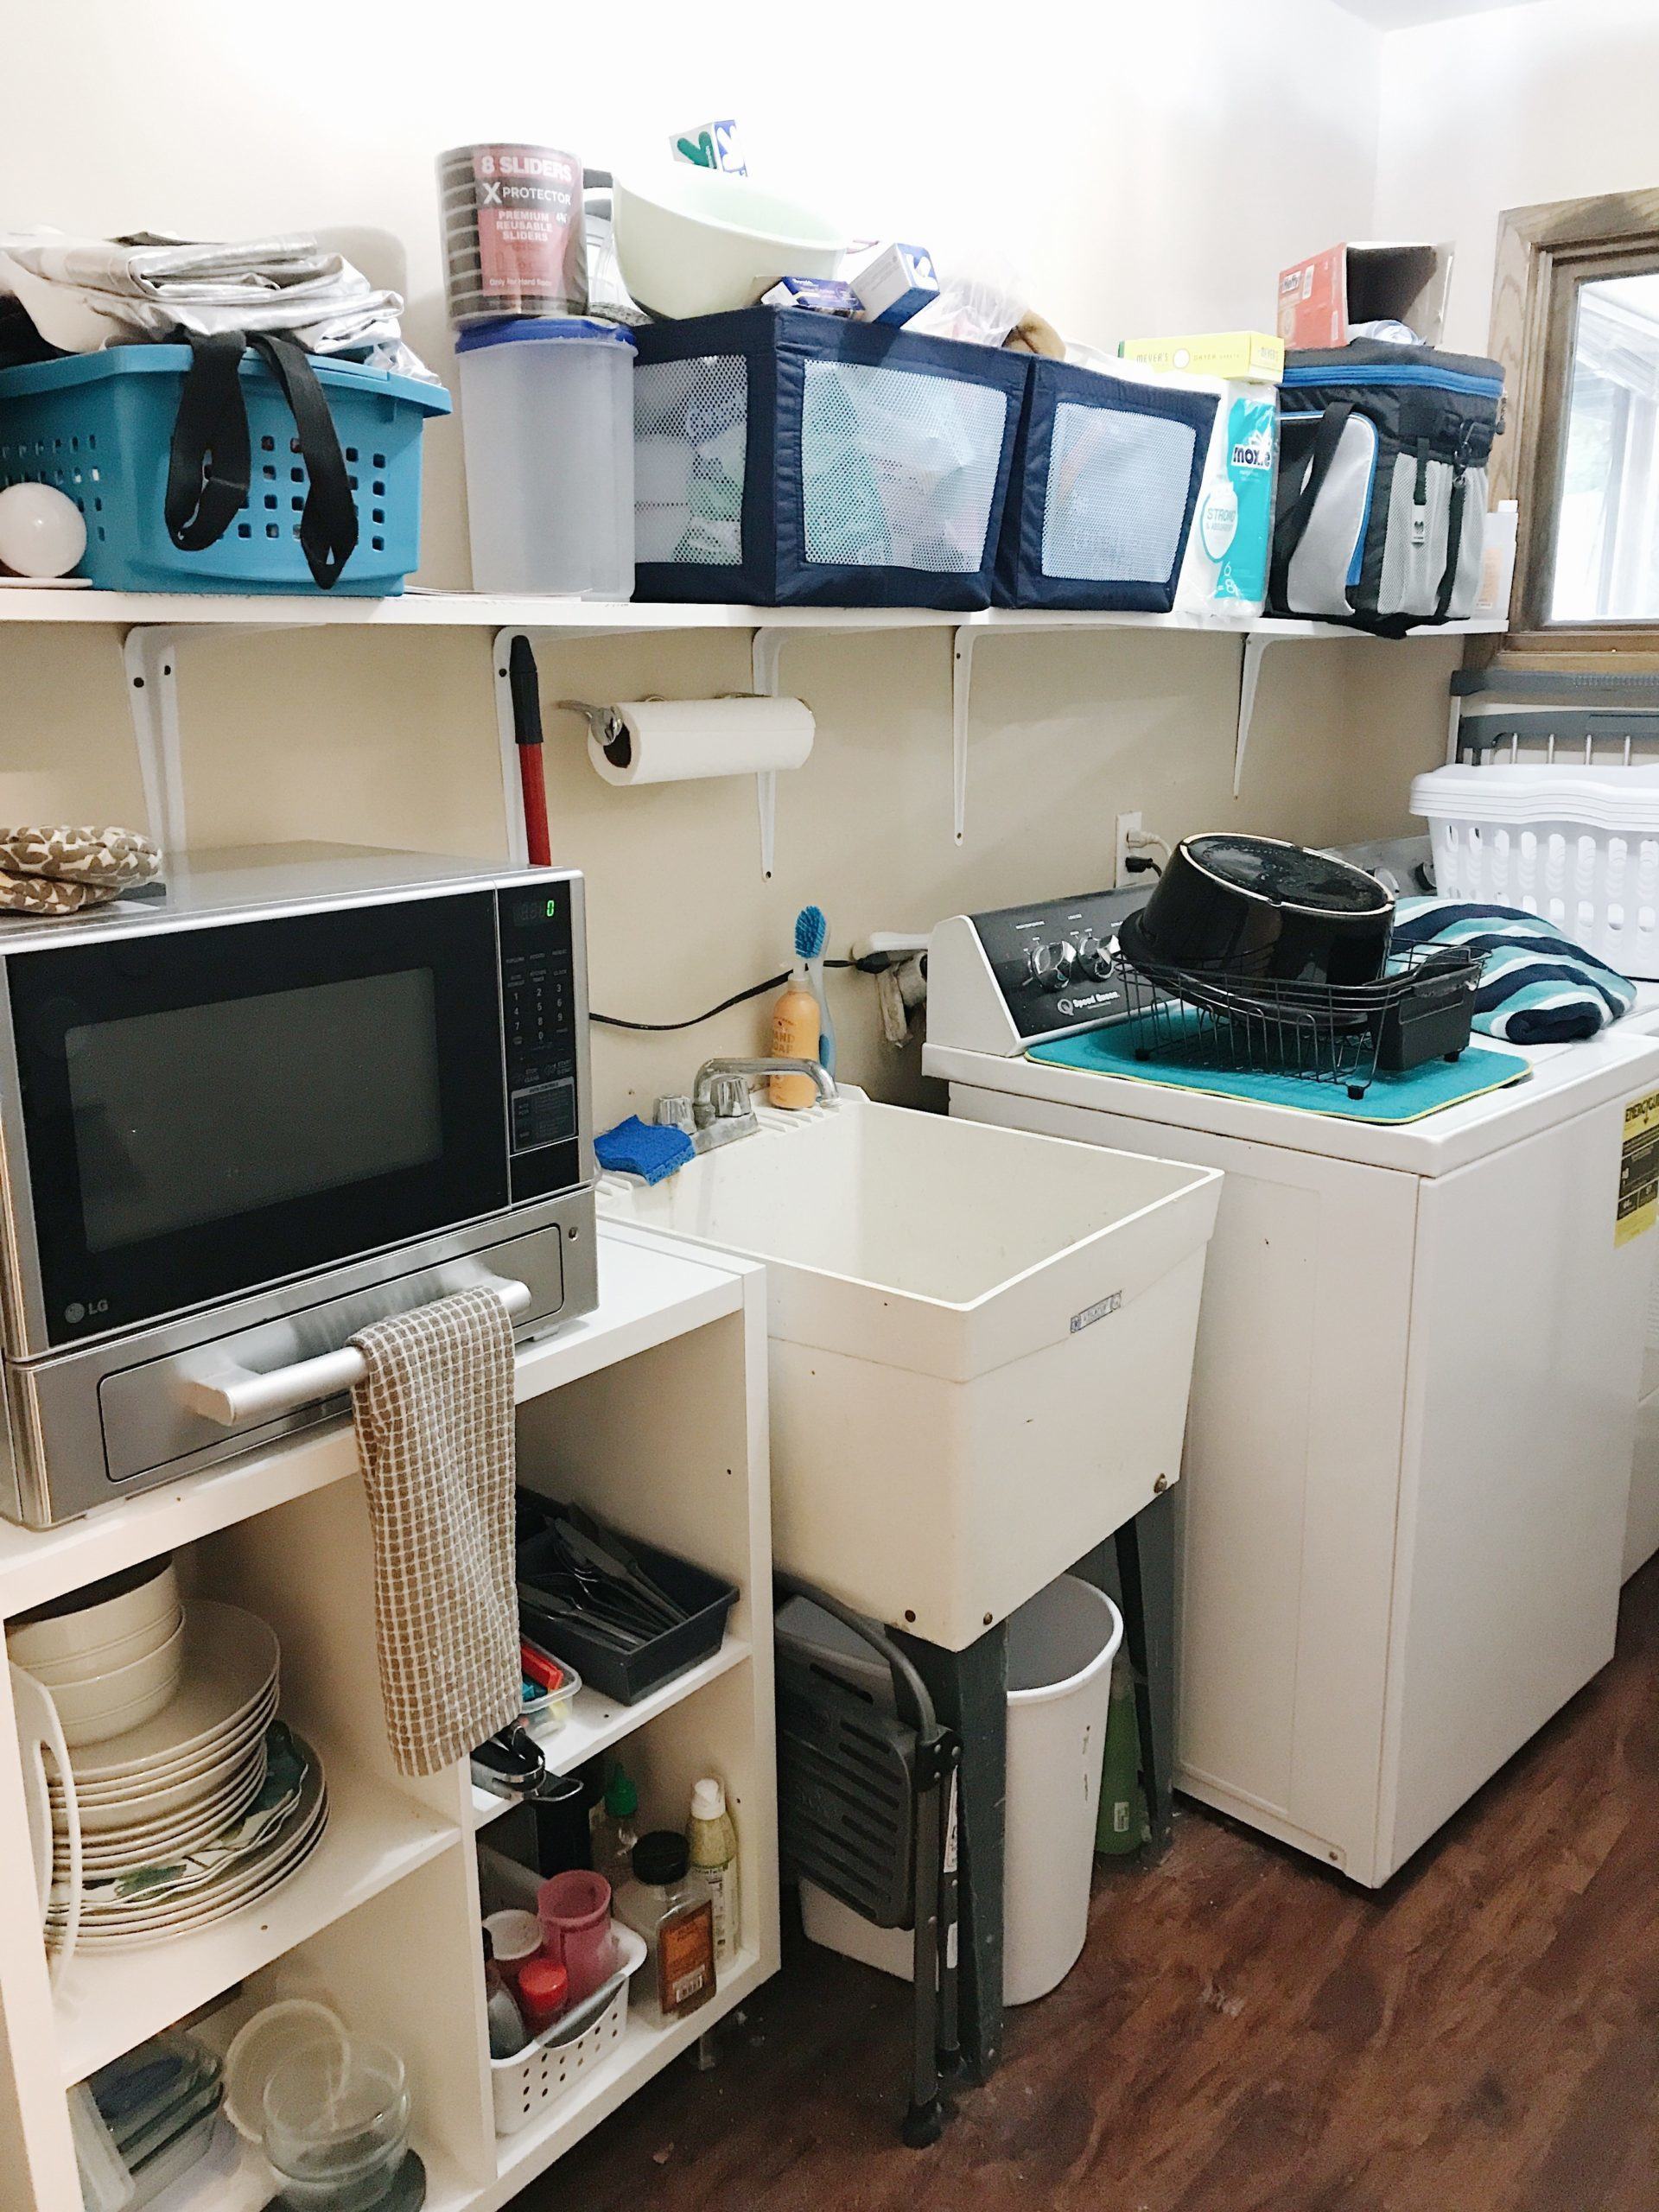 Set up a dishwashing station in your laundry room for your temporary kitchen